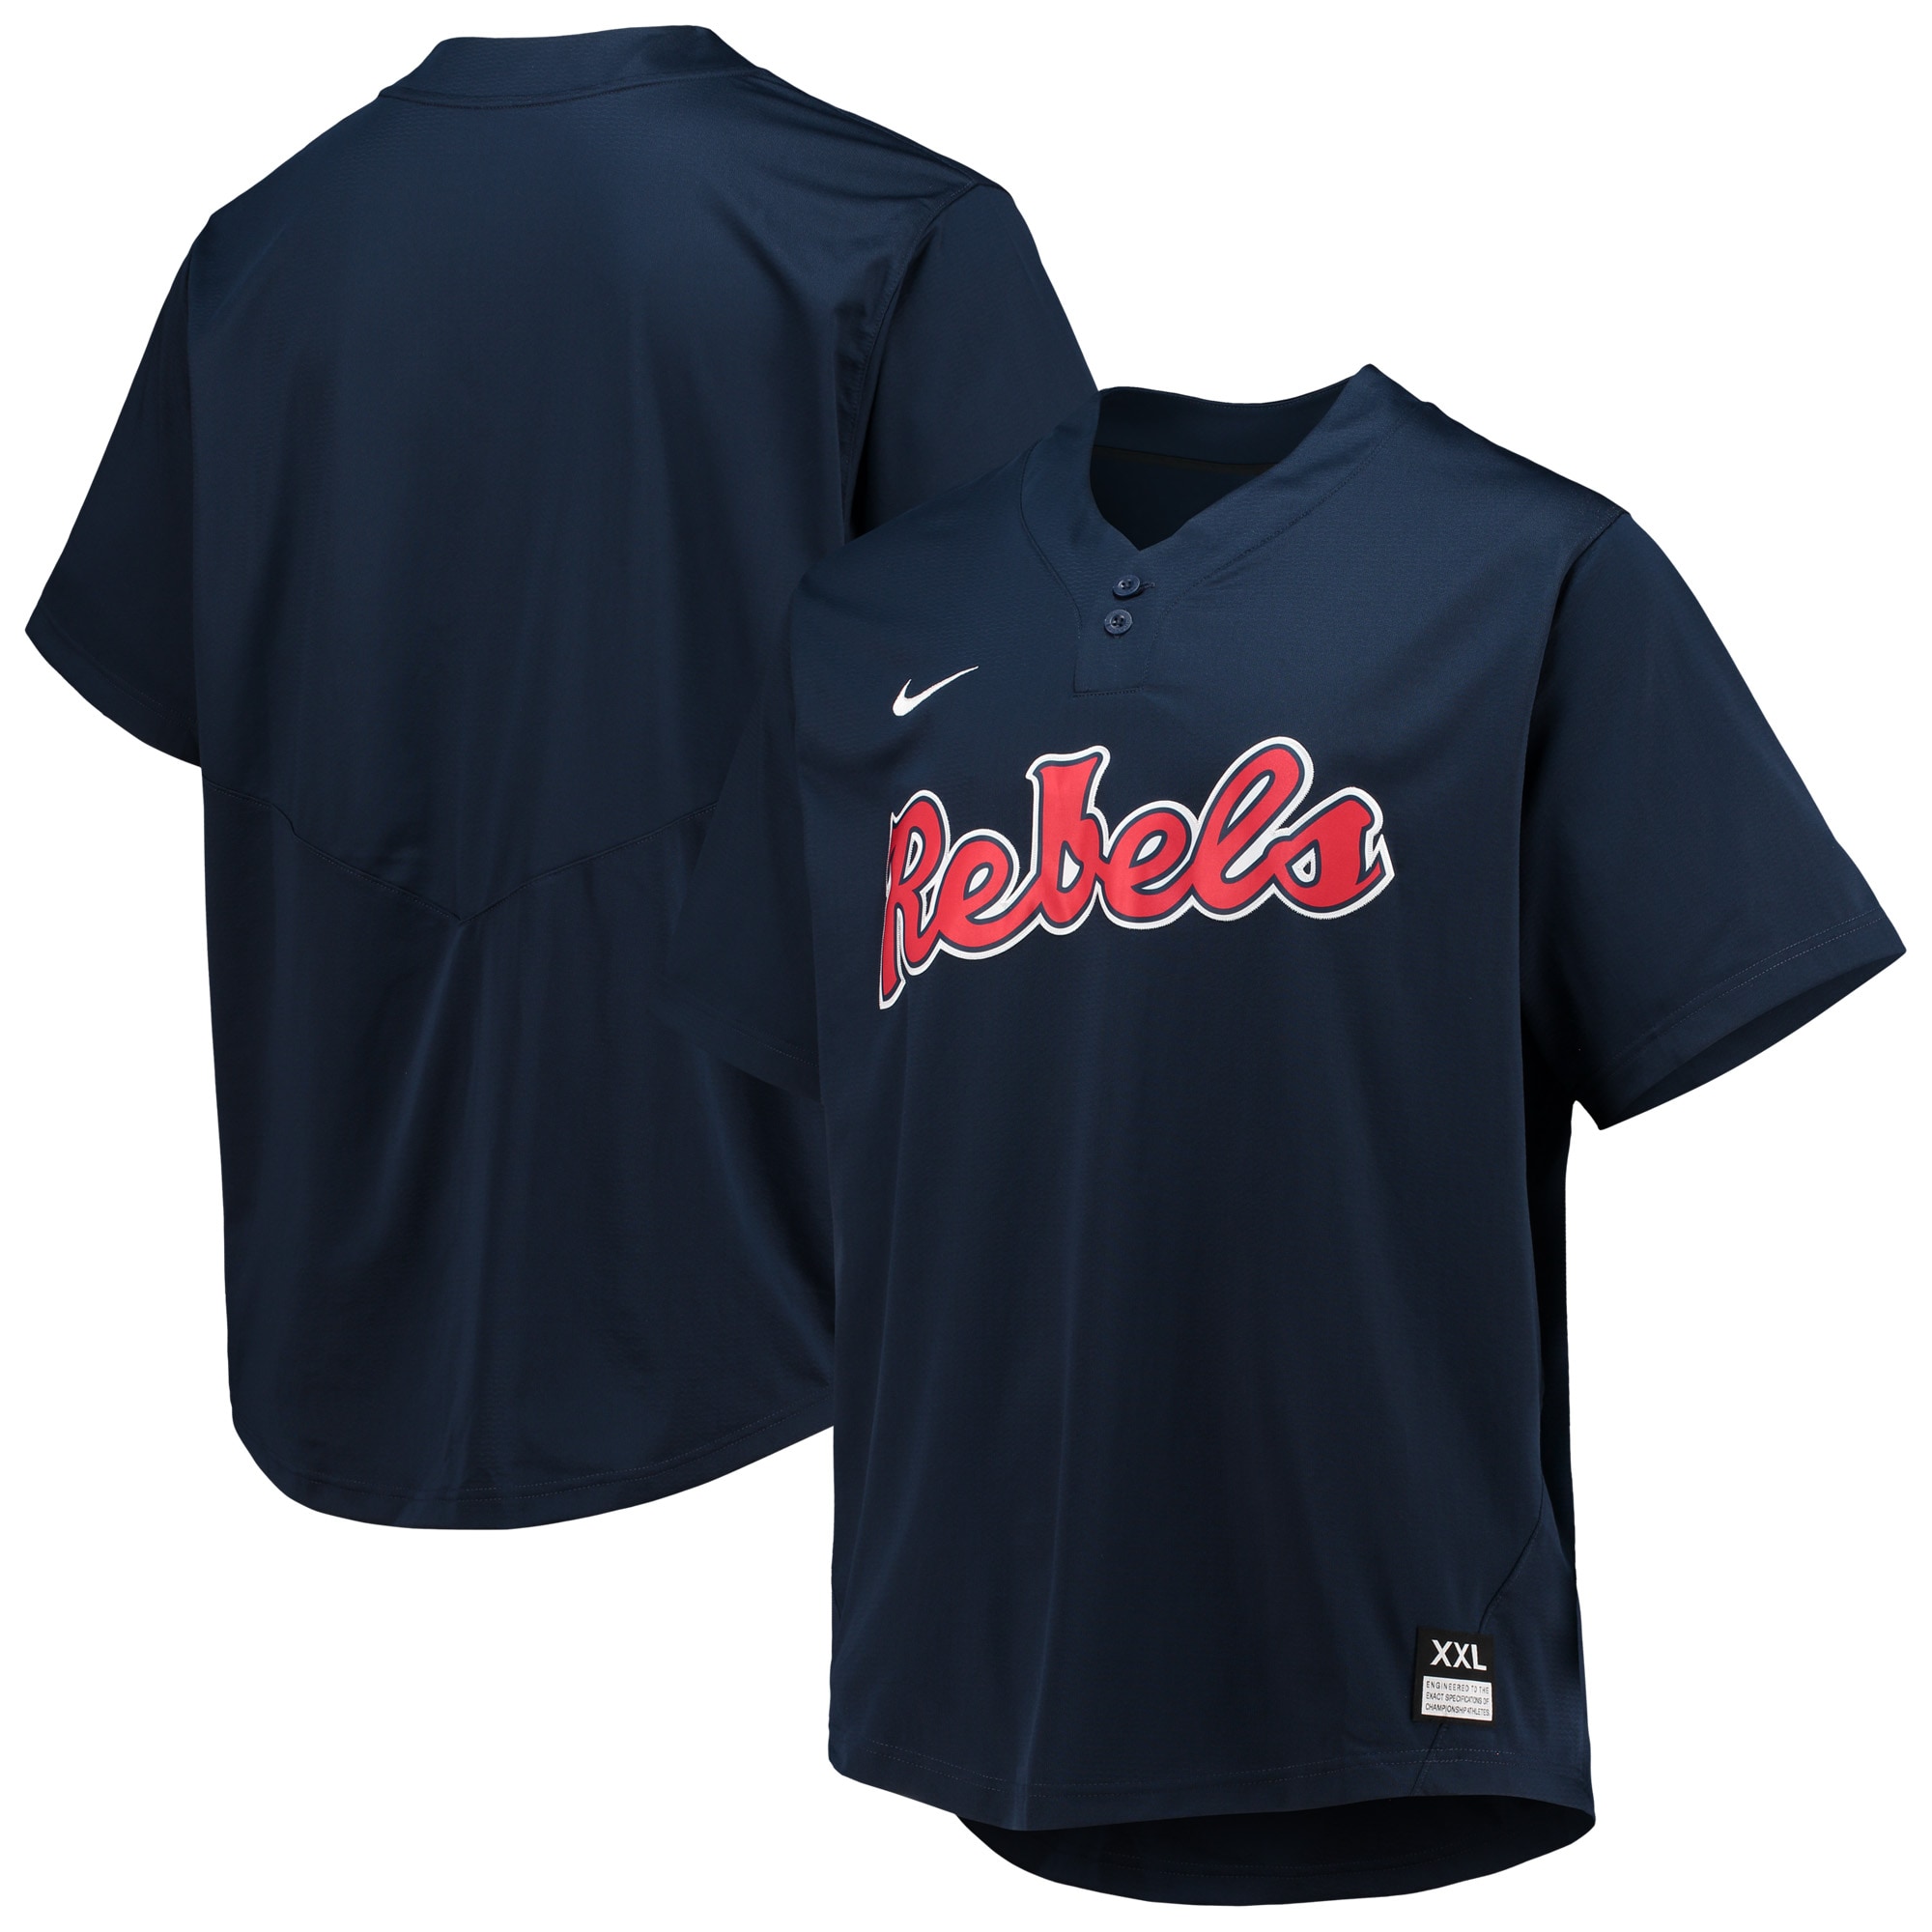 Ole Miss Rebels Two-Button Replica Baseball Jersey - Navy For Youth Women Men